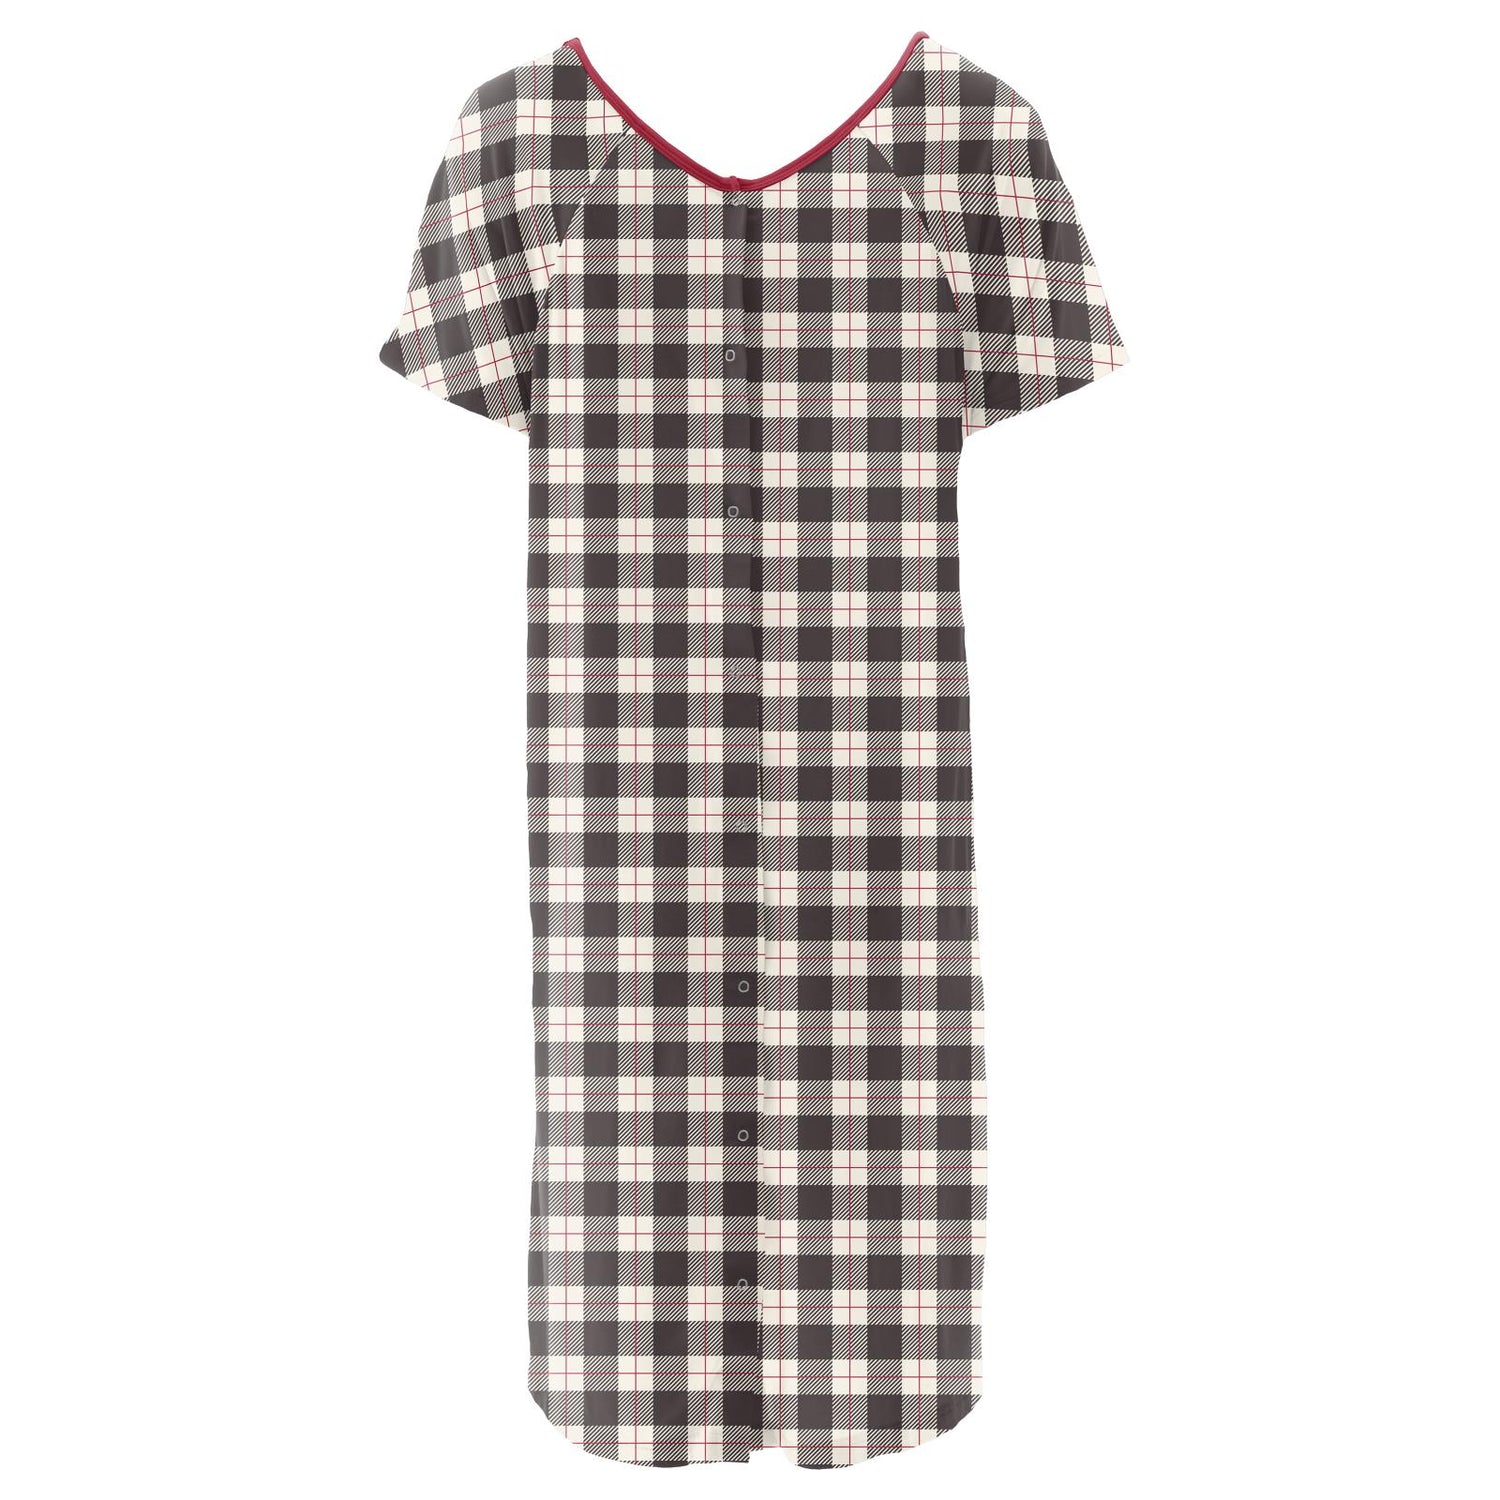 Women's Print Hospital Gown in Midnight Holiday Plaid